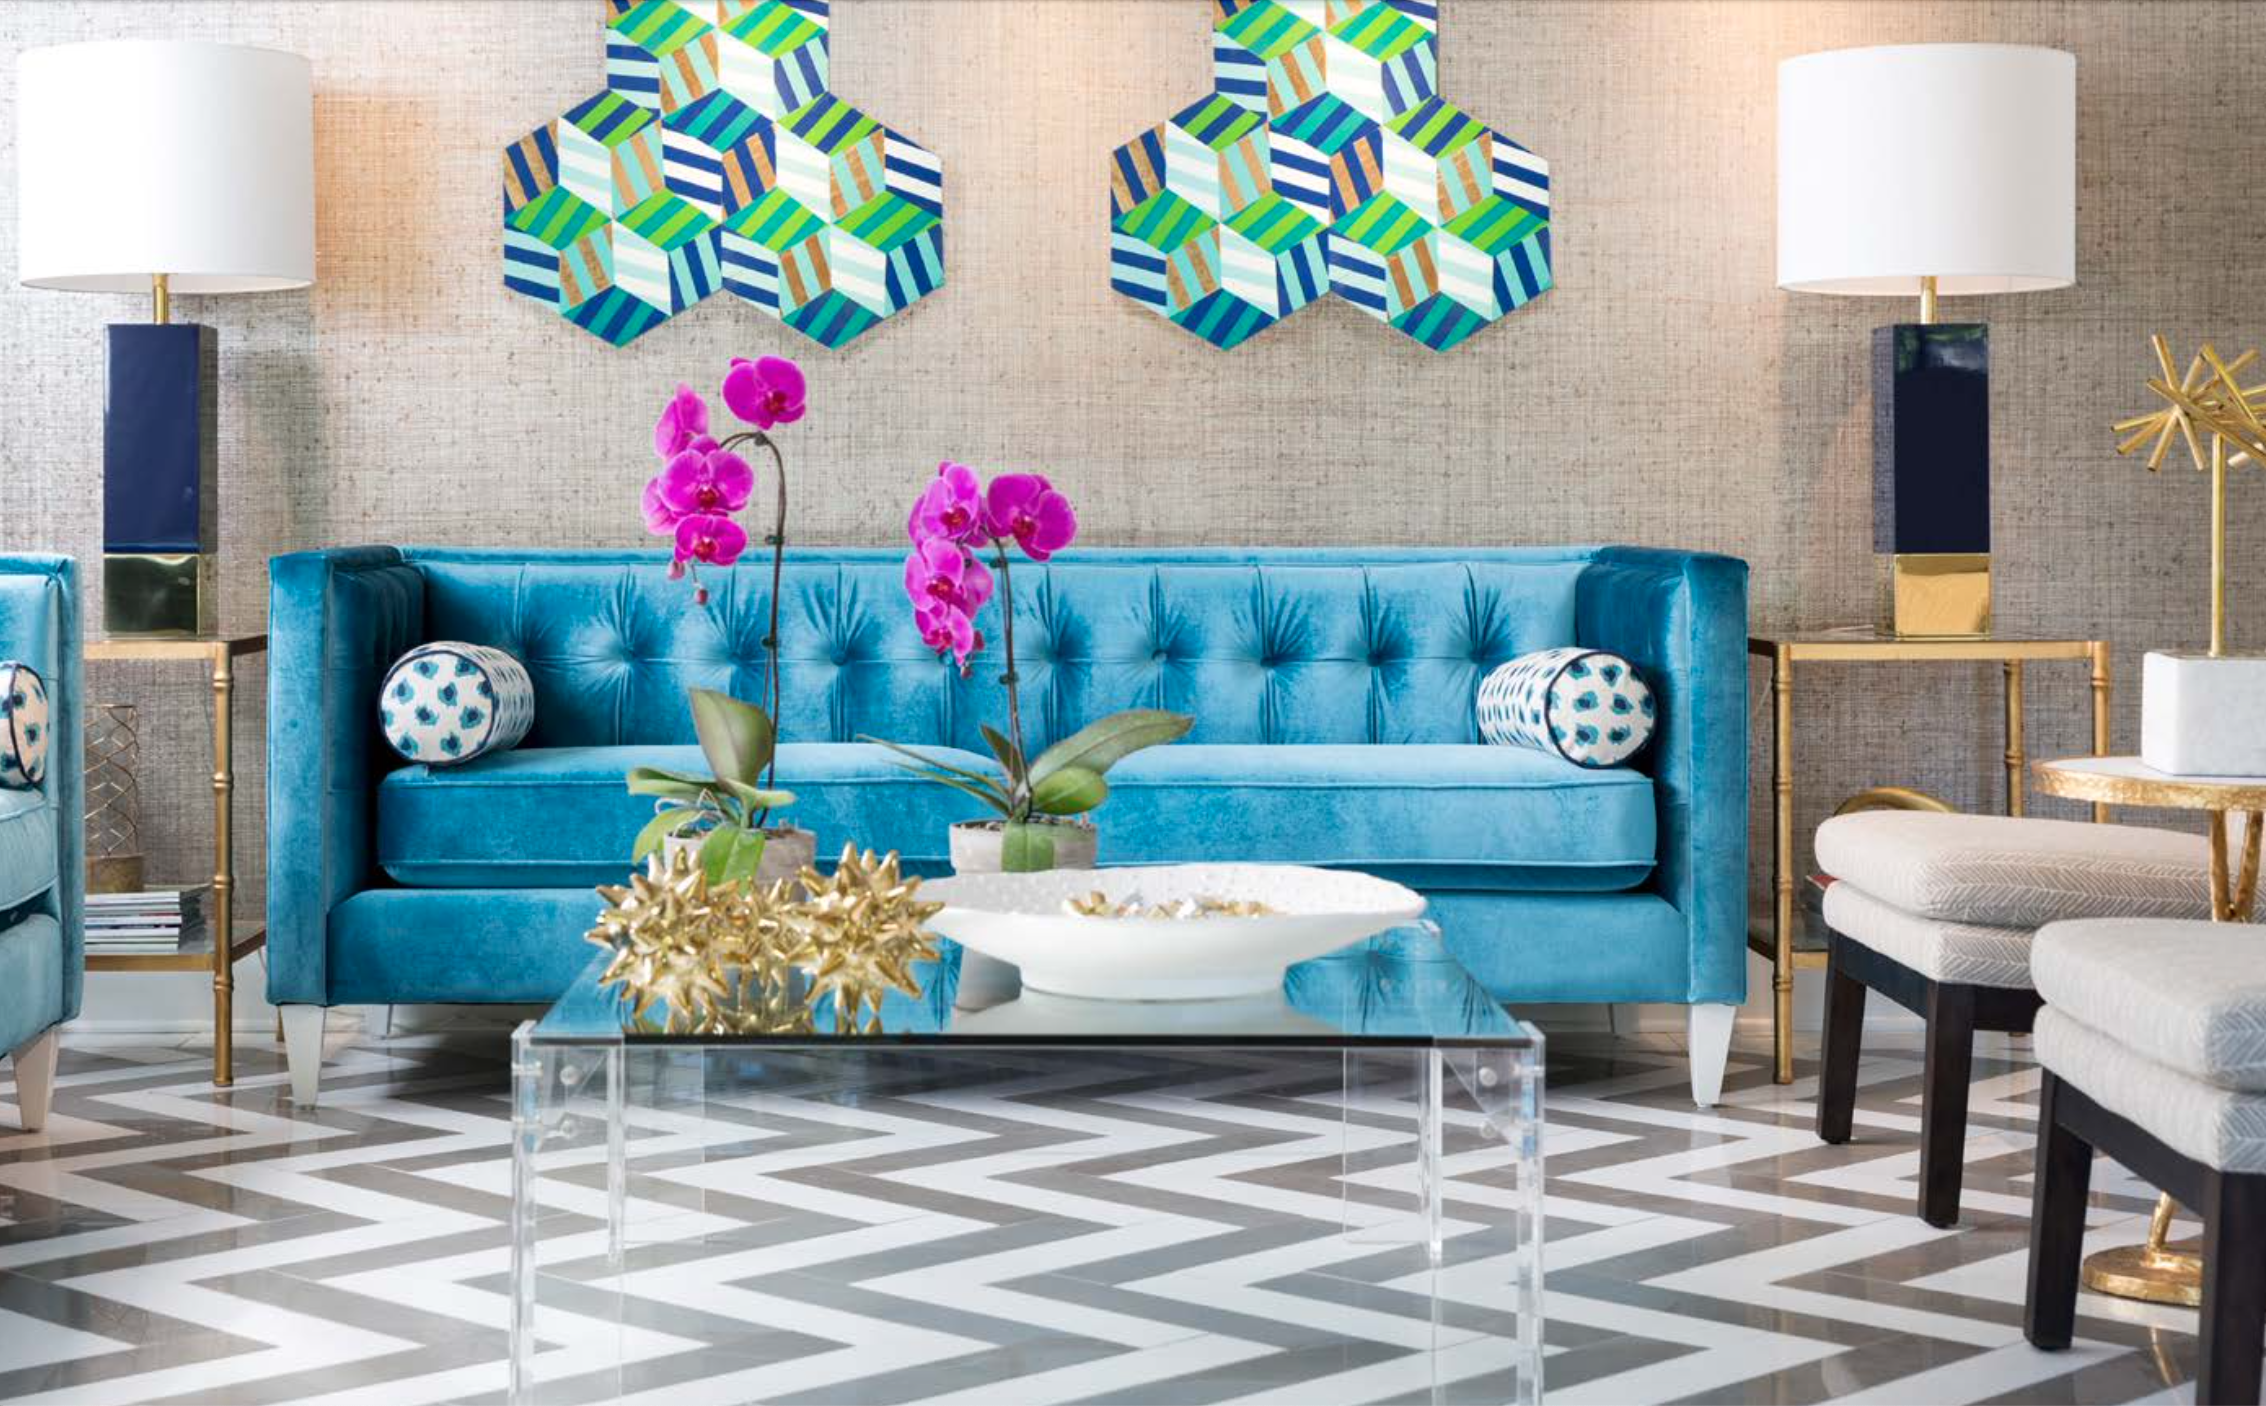 “Geometrics add instant pop,” writes Amanda Reynal. “I use them when I want to imbue a room with energy. Here, I took a cue from the chevron floor pattern and found artwork to keep the electric spirit going.” Photo: Rick Lozier/courtesy of Abrams
